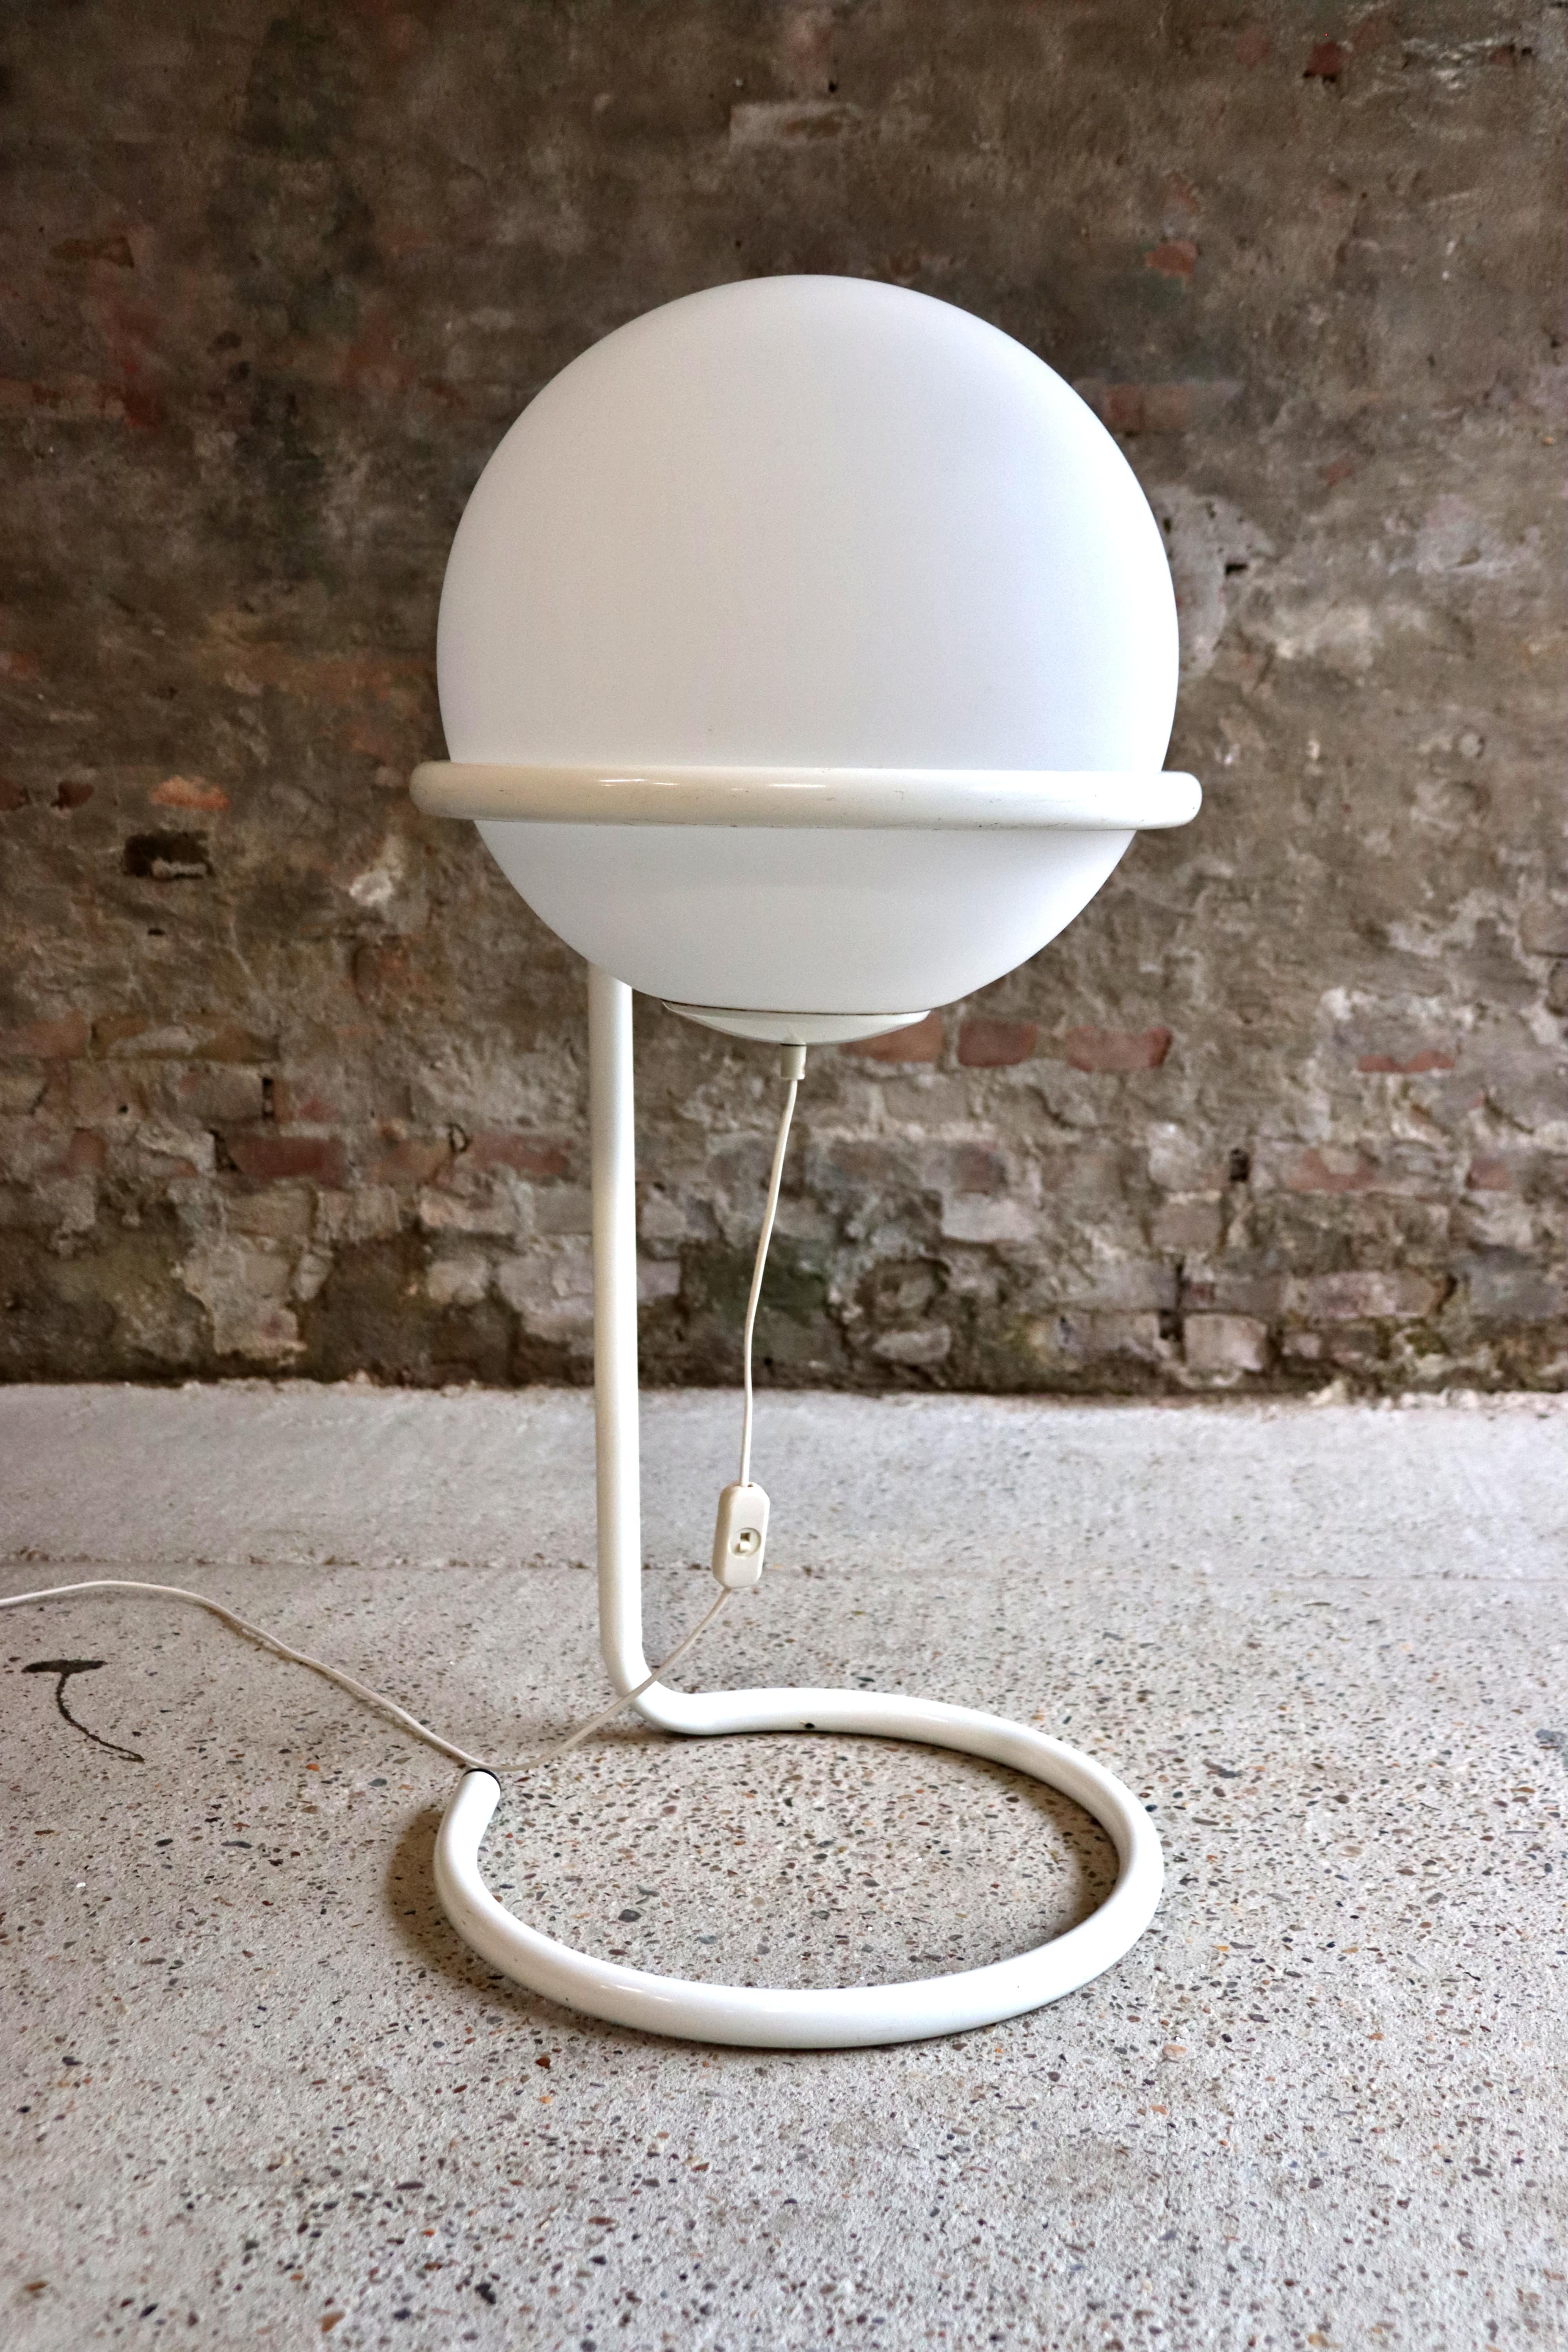 This awesome globe lamp has the typical space age vibe. It has an big frosted glass ball and beautifully simple designed frame. The metal tubular frame consists of 1 piece, with the upper circle being the support for the sphere and the lower one